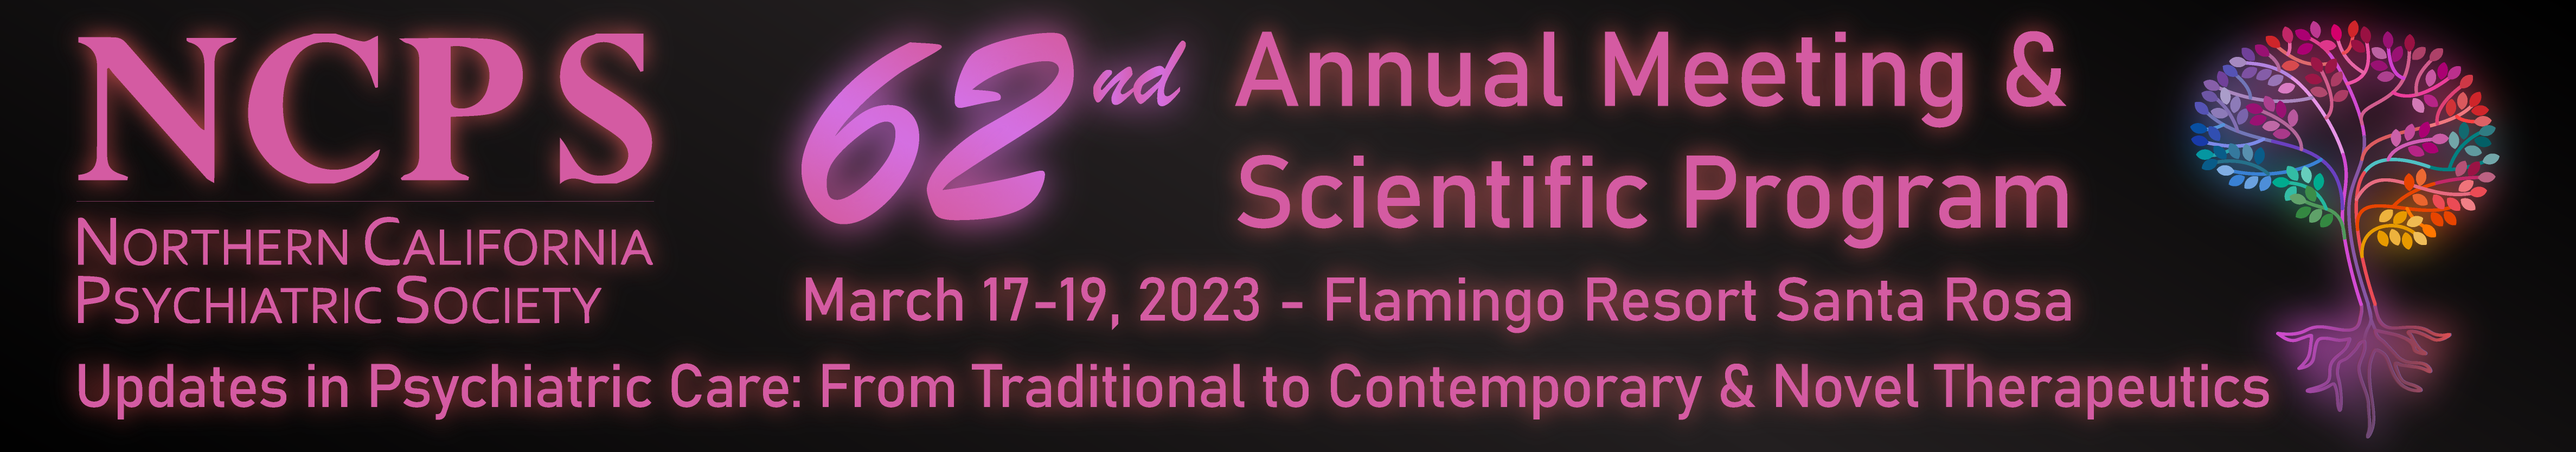 2023%20Annual%20Meeting%20Event%20Banner.png